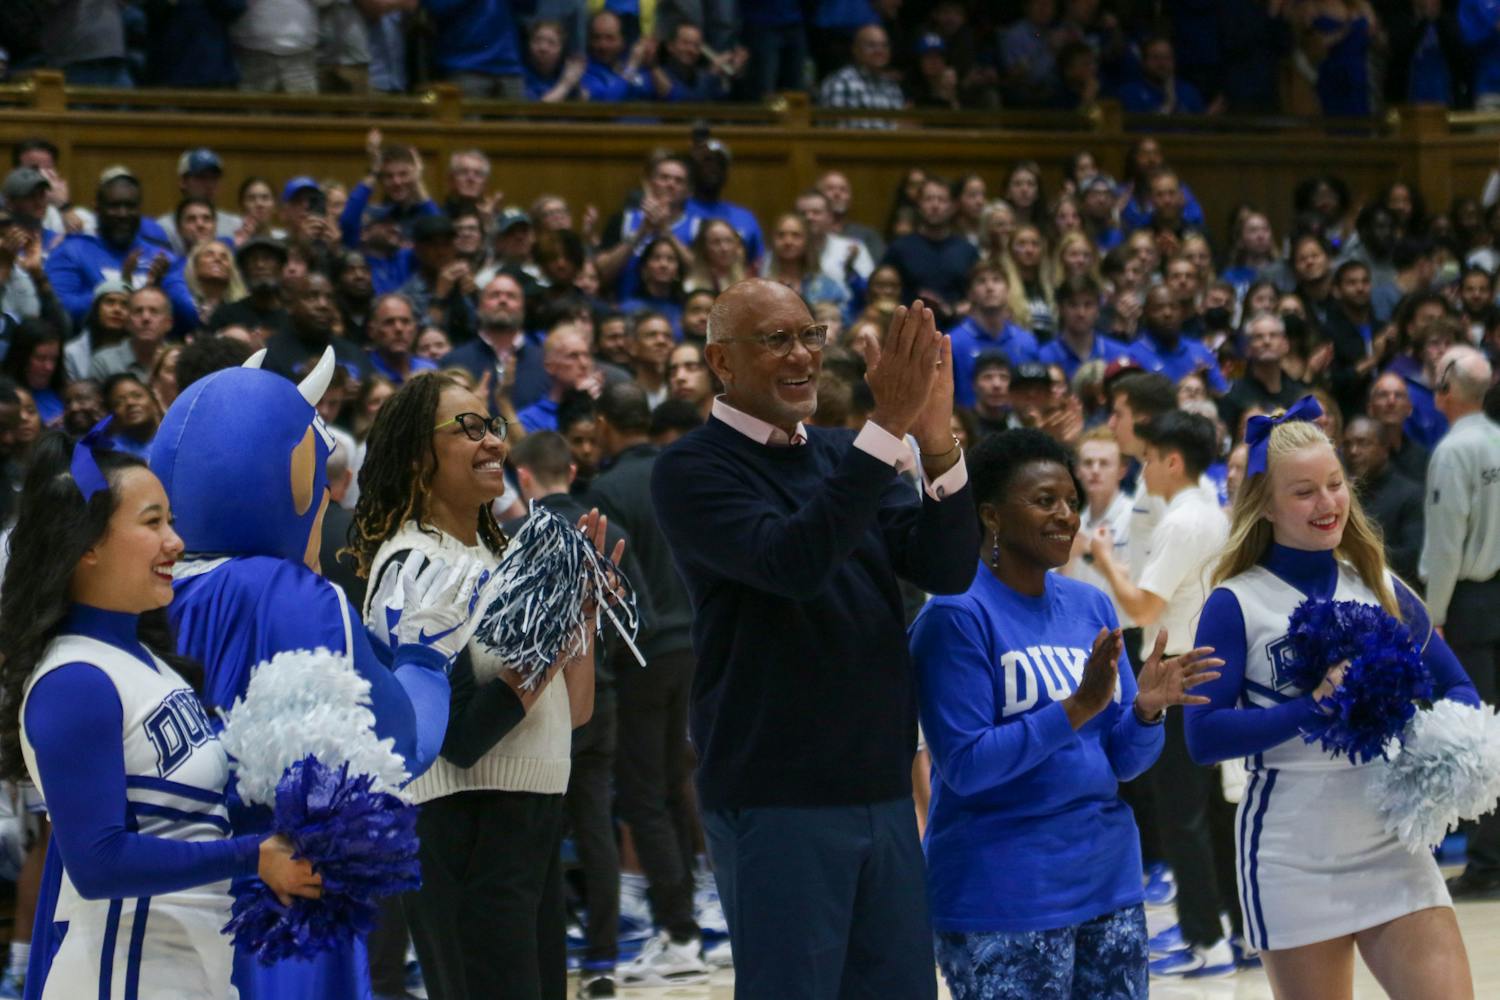 A pair of Duke legends returned to Cameron Indoor Stadium for Monday's game: C.B. Claiborne, the program's first African-American player, and Nolan Smith, a former Blue Devil captain and assistant coach.